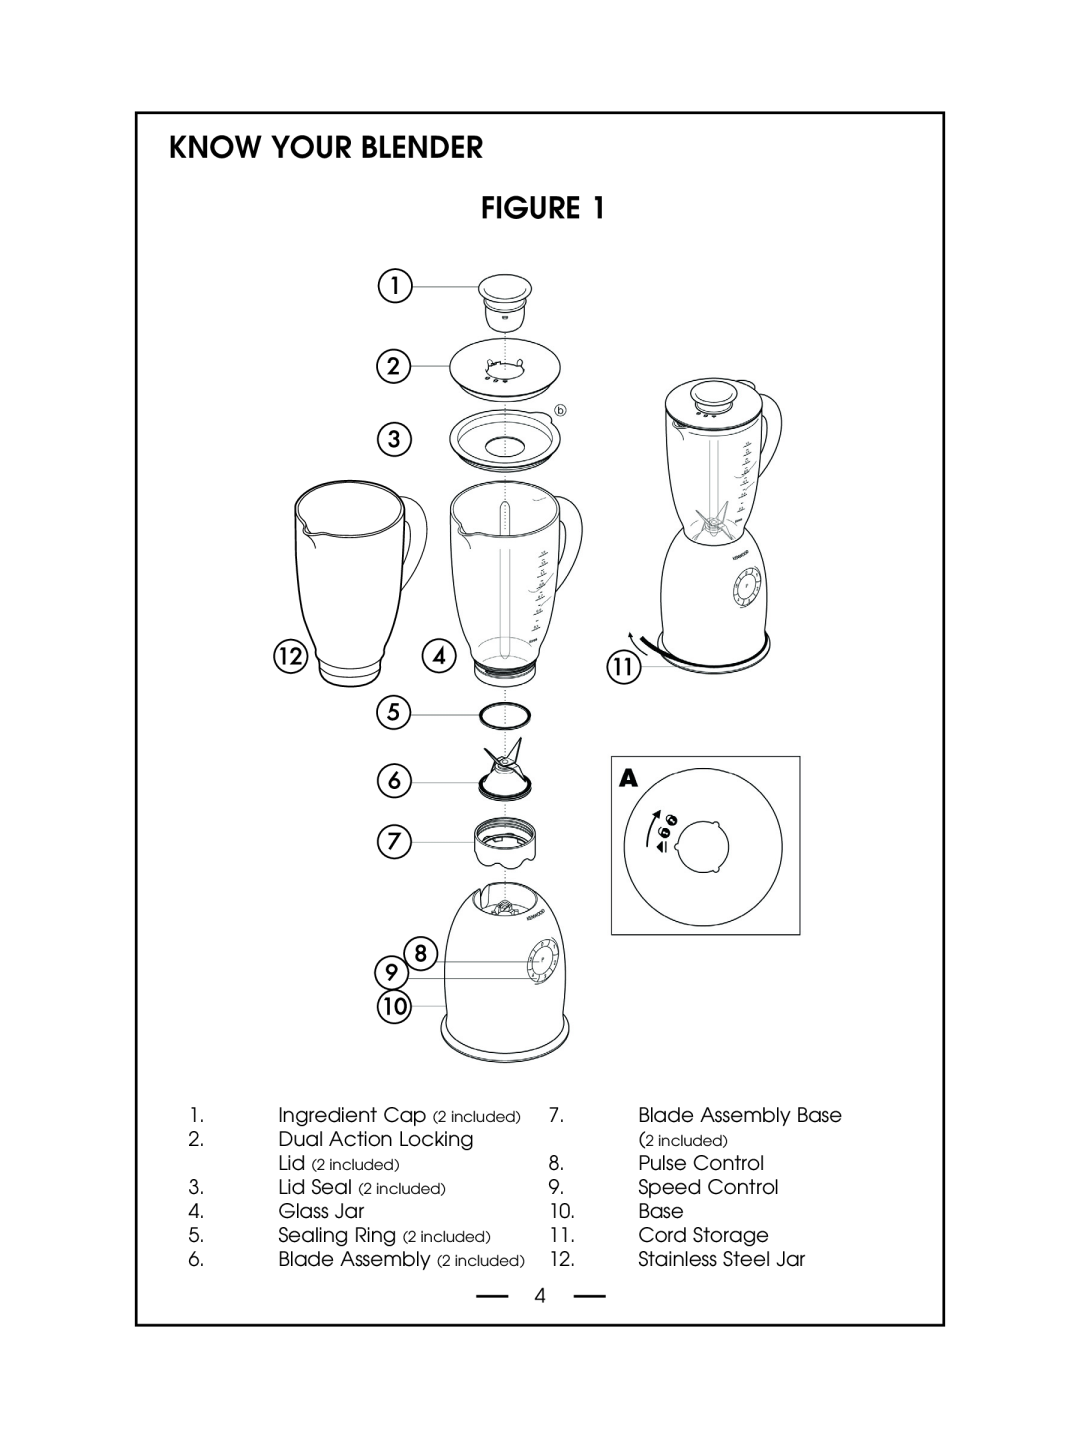 DeLonghi DBL750 Series instruction manual Know Your Blender Figure 